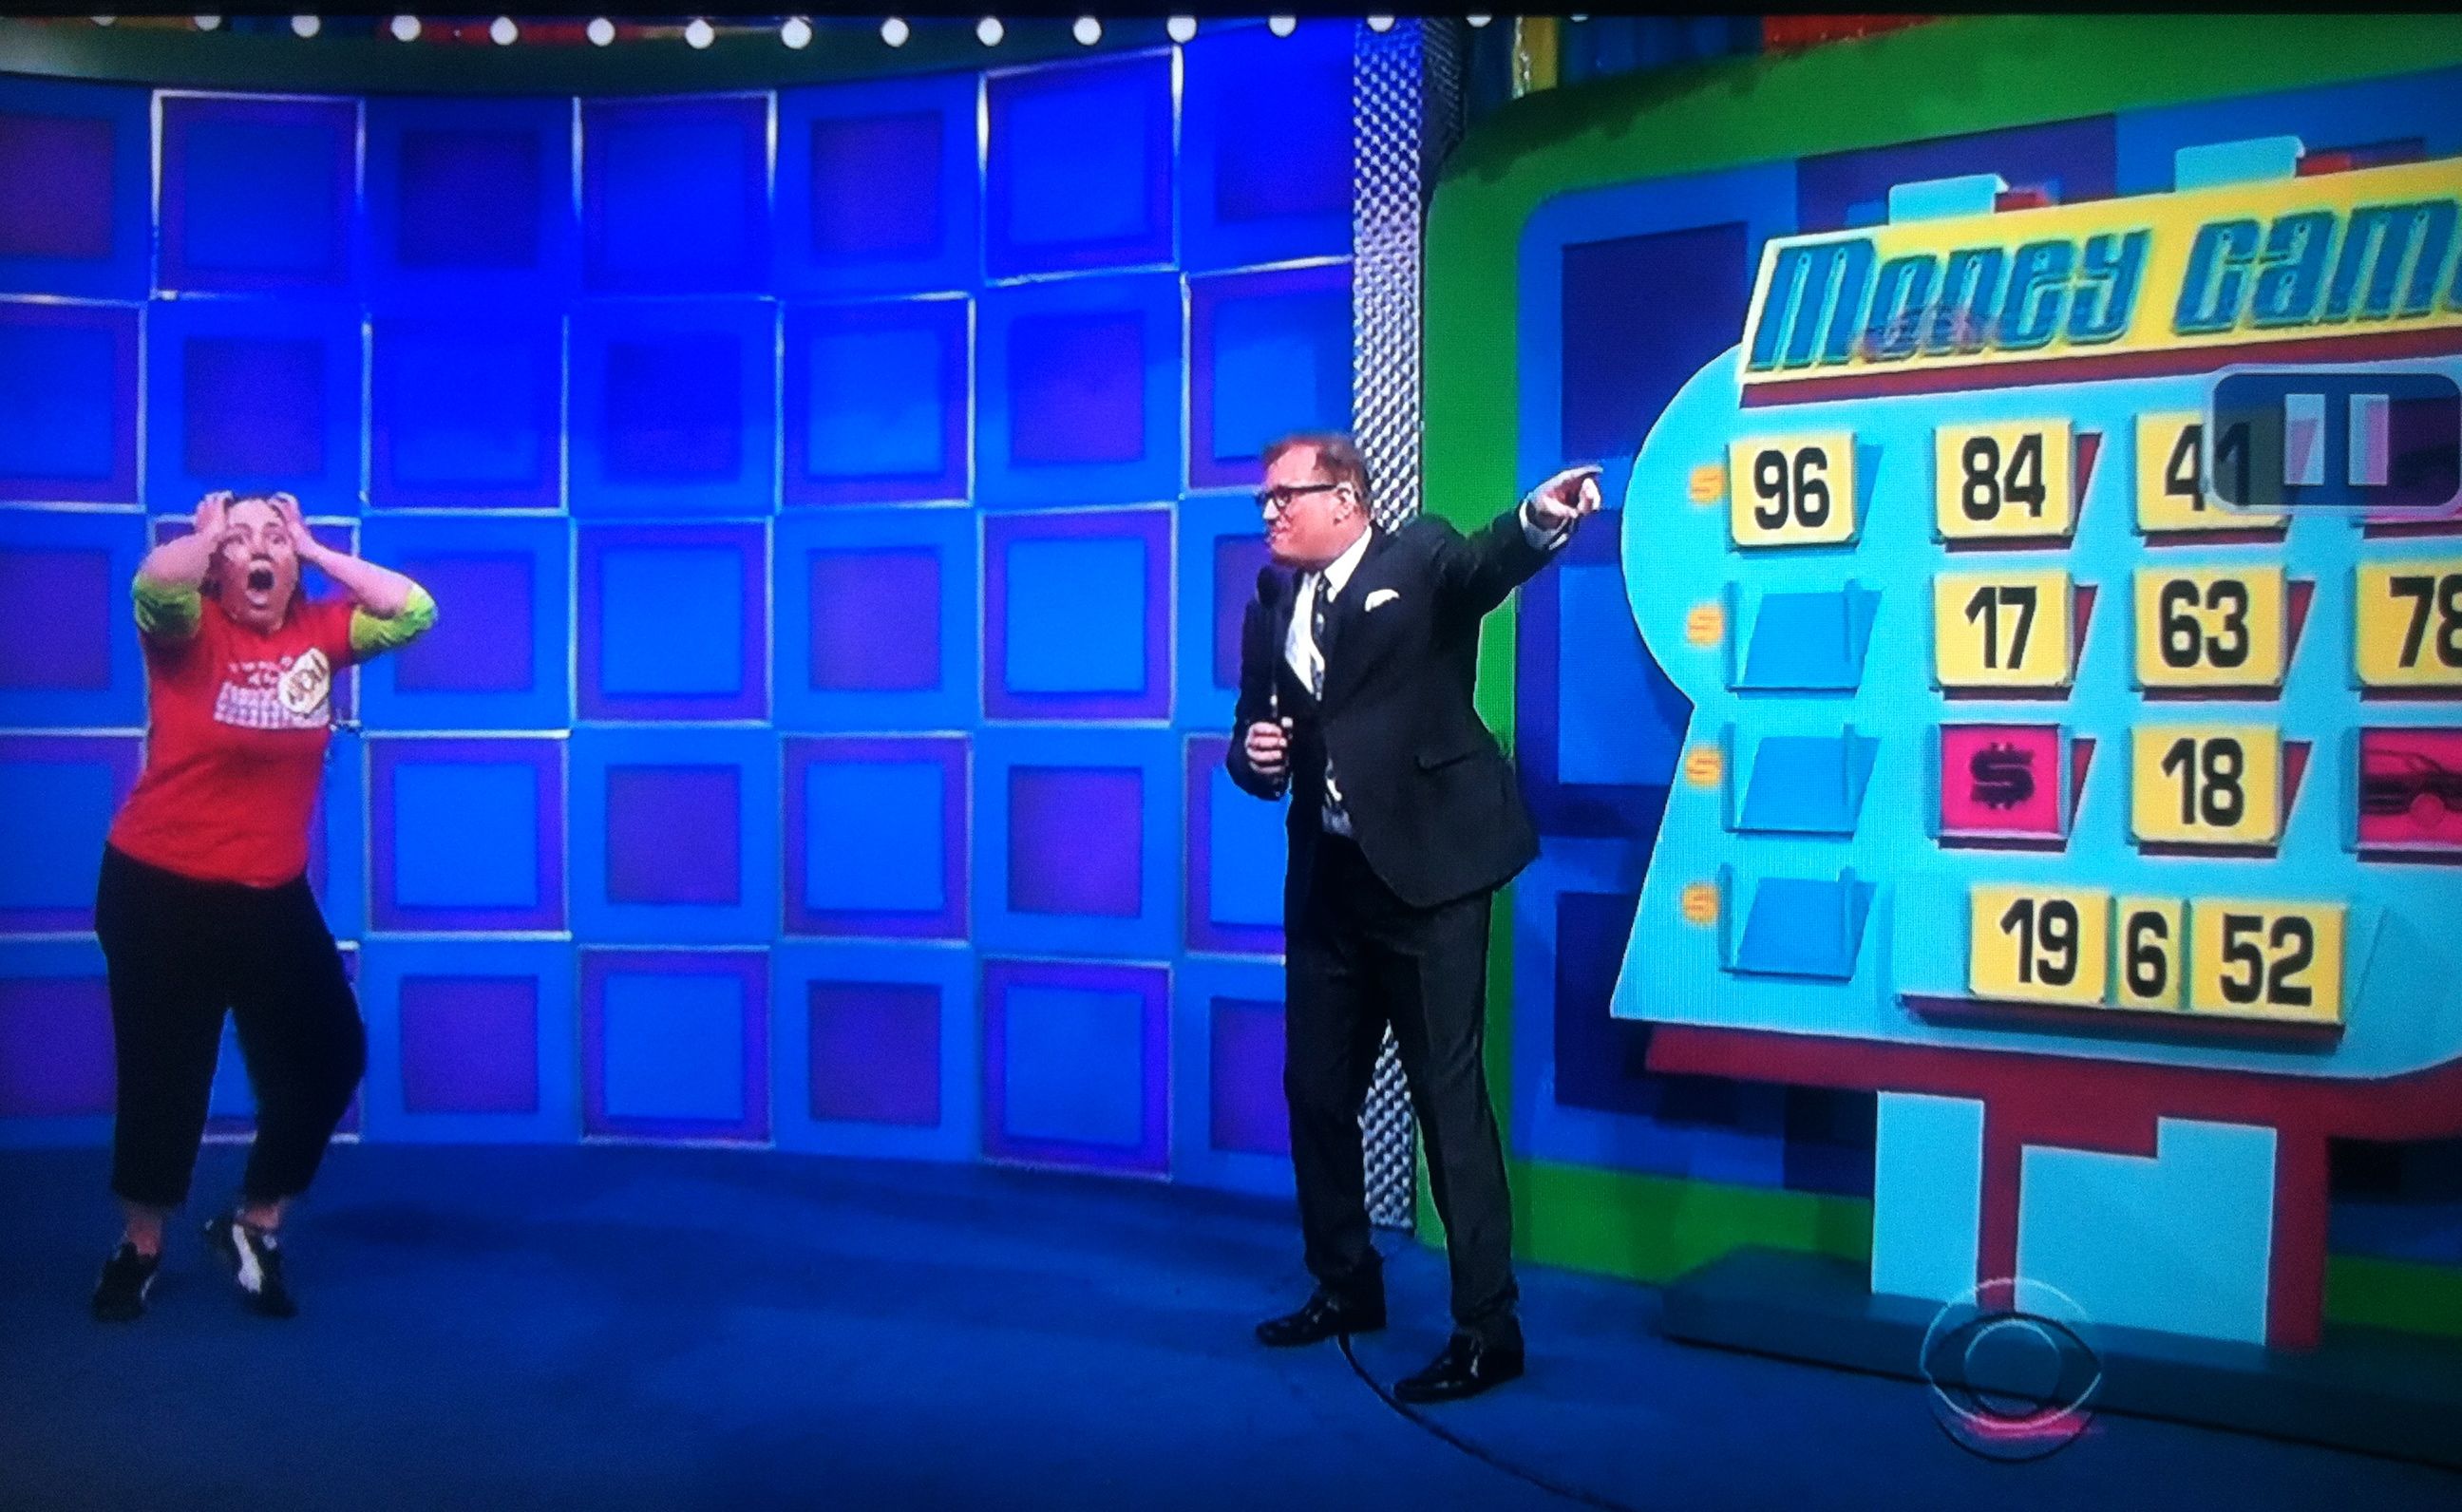 Drew Carey points and tells Aurora to go get her new car after winning on The Money Game on The Price is Right